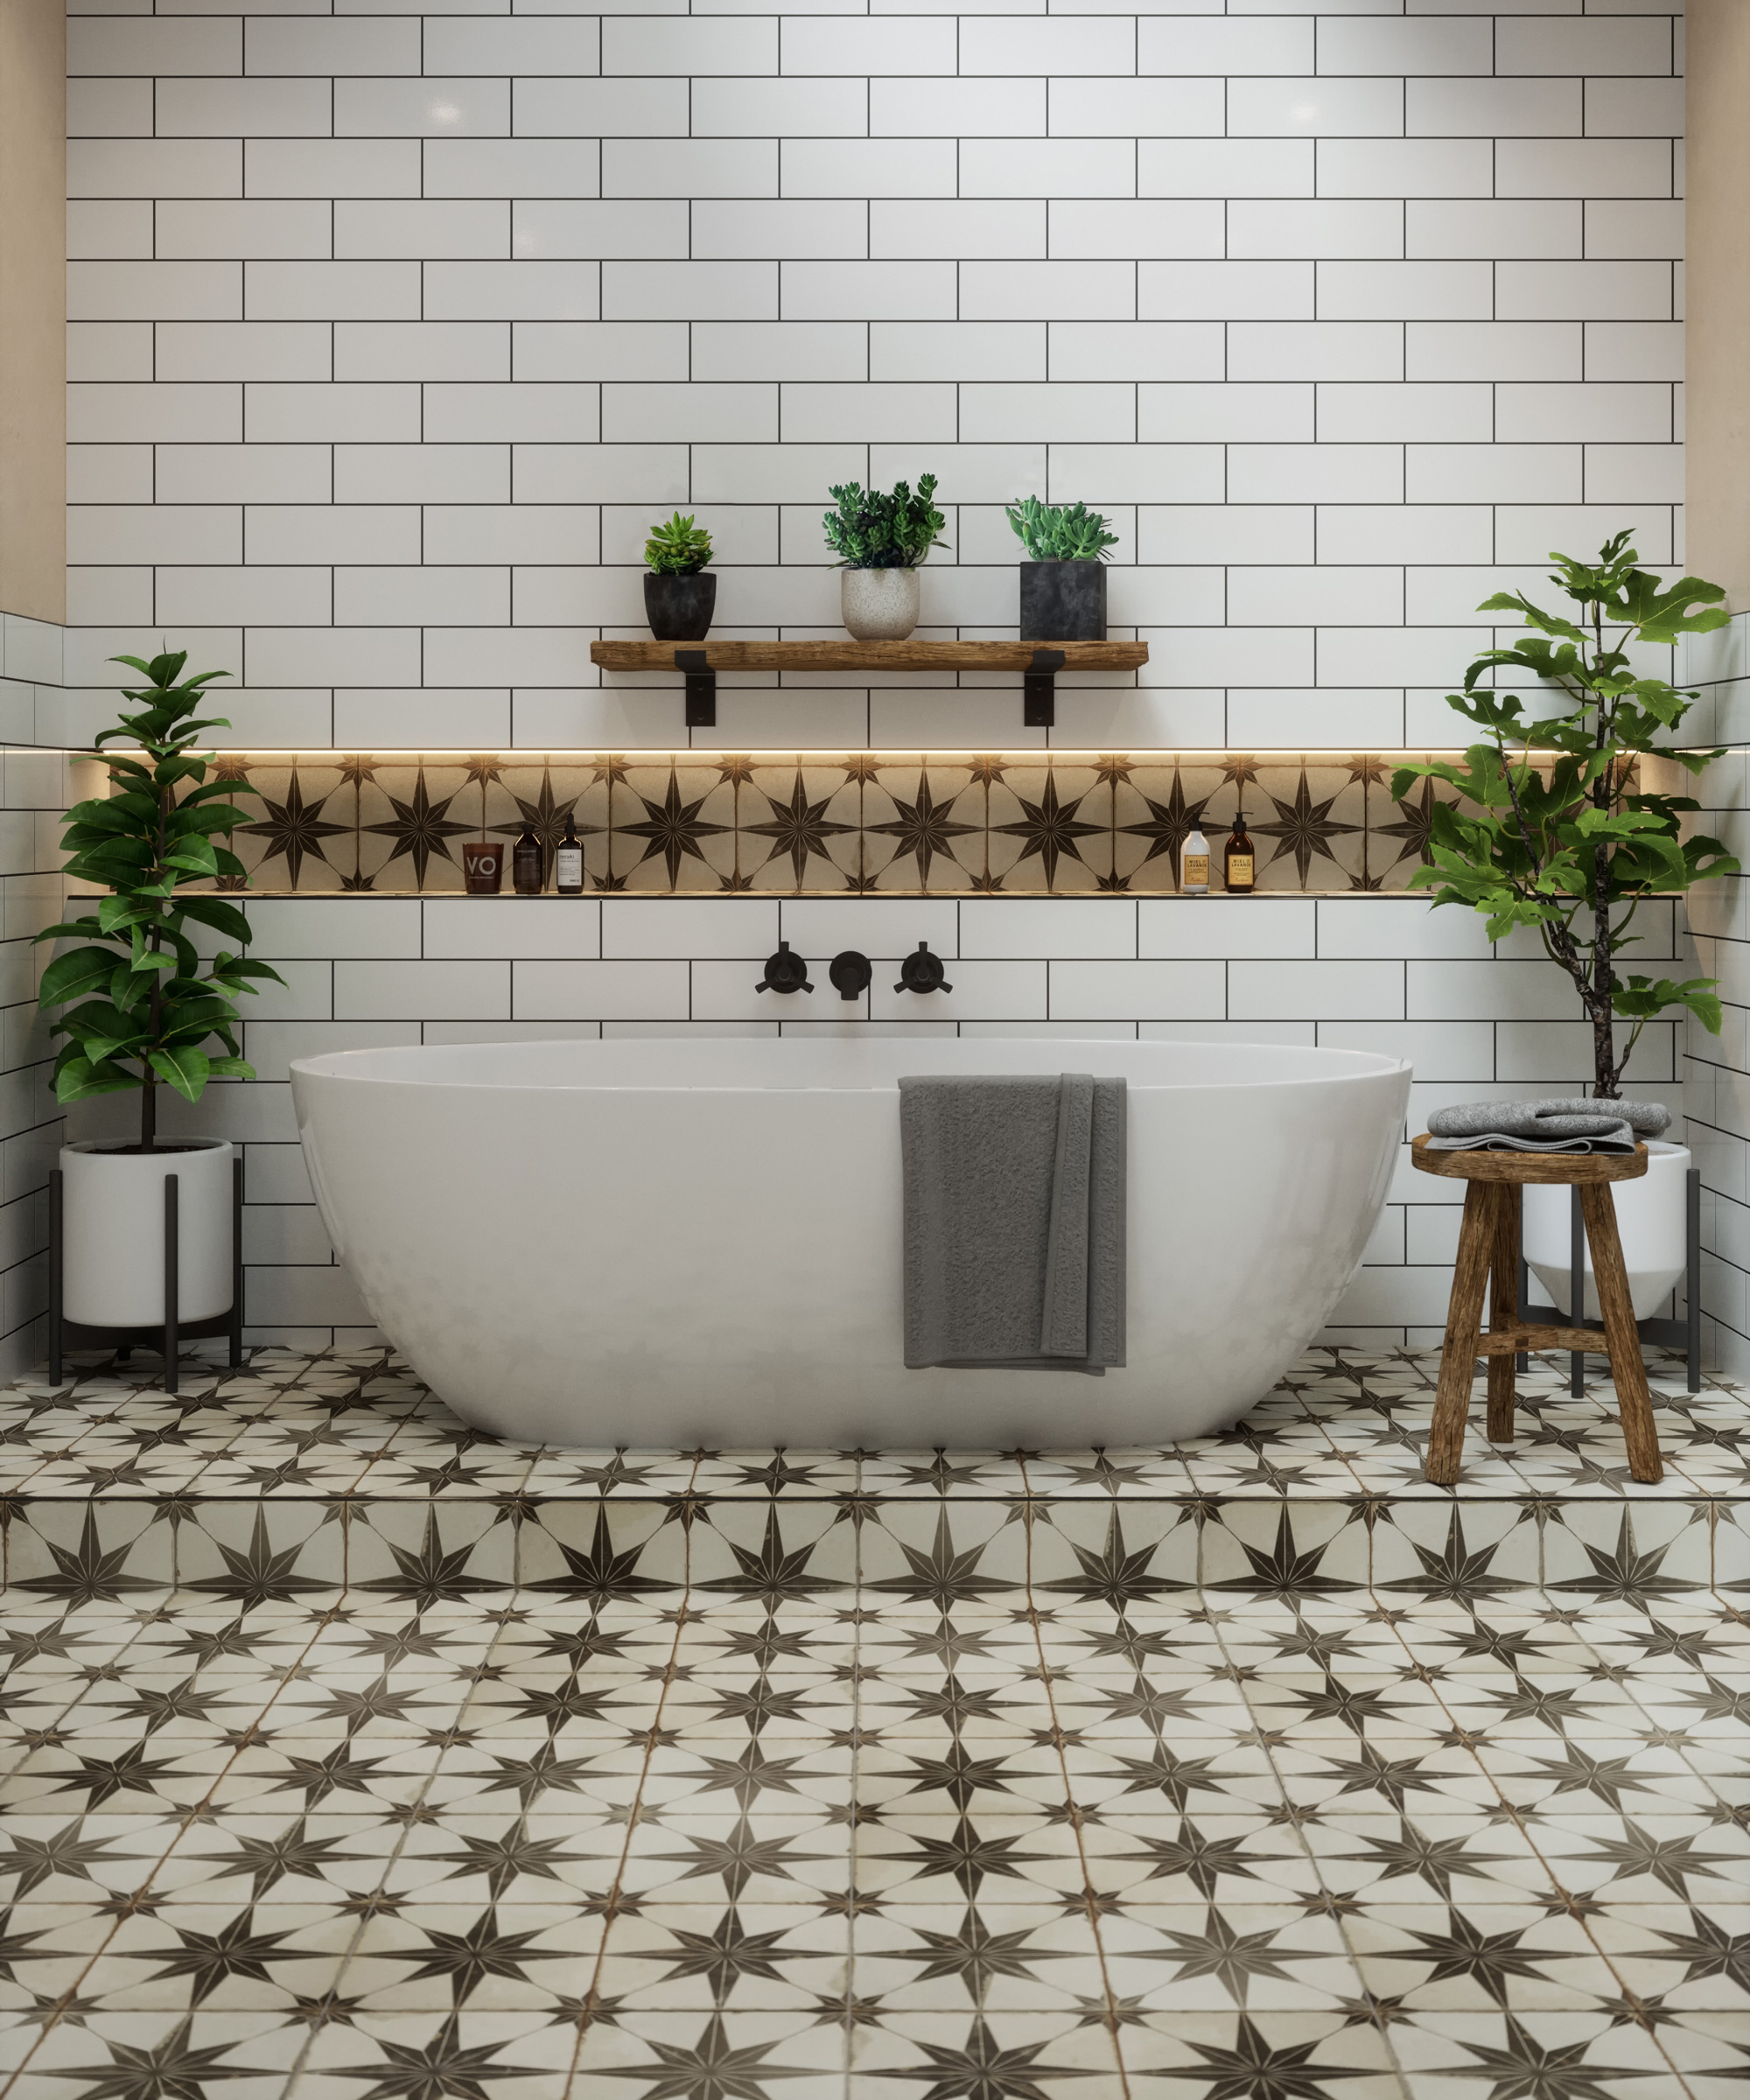 Bathroom Tile Ideas 32 New Looks To, How To Tile Directly To Bathtub